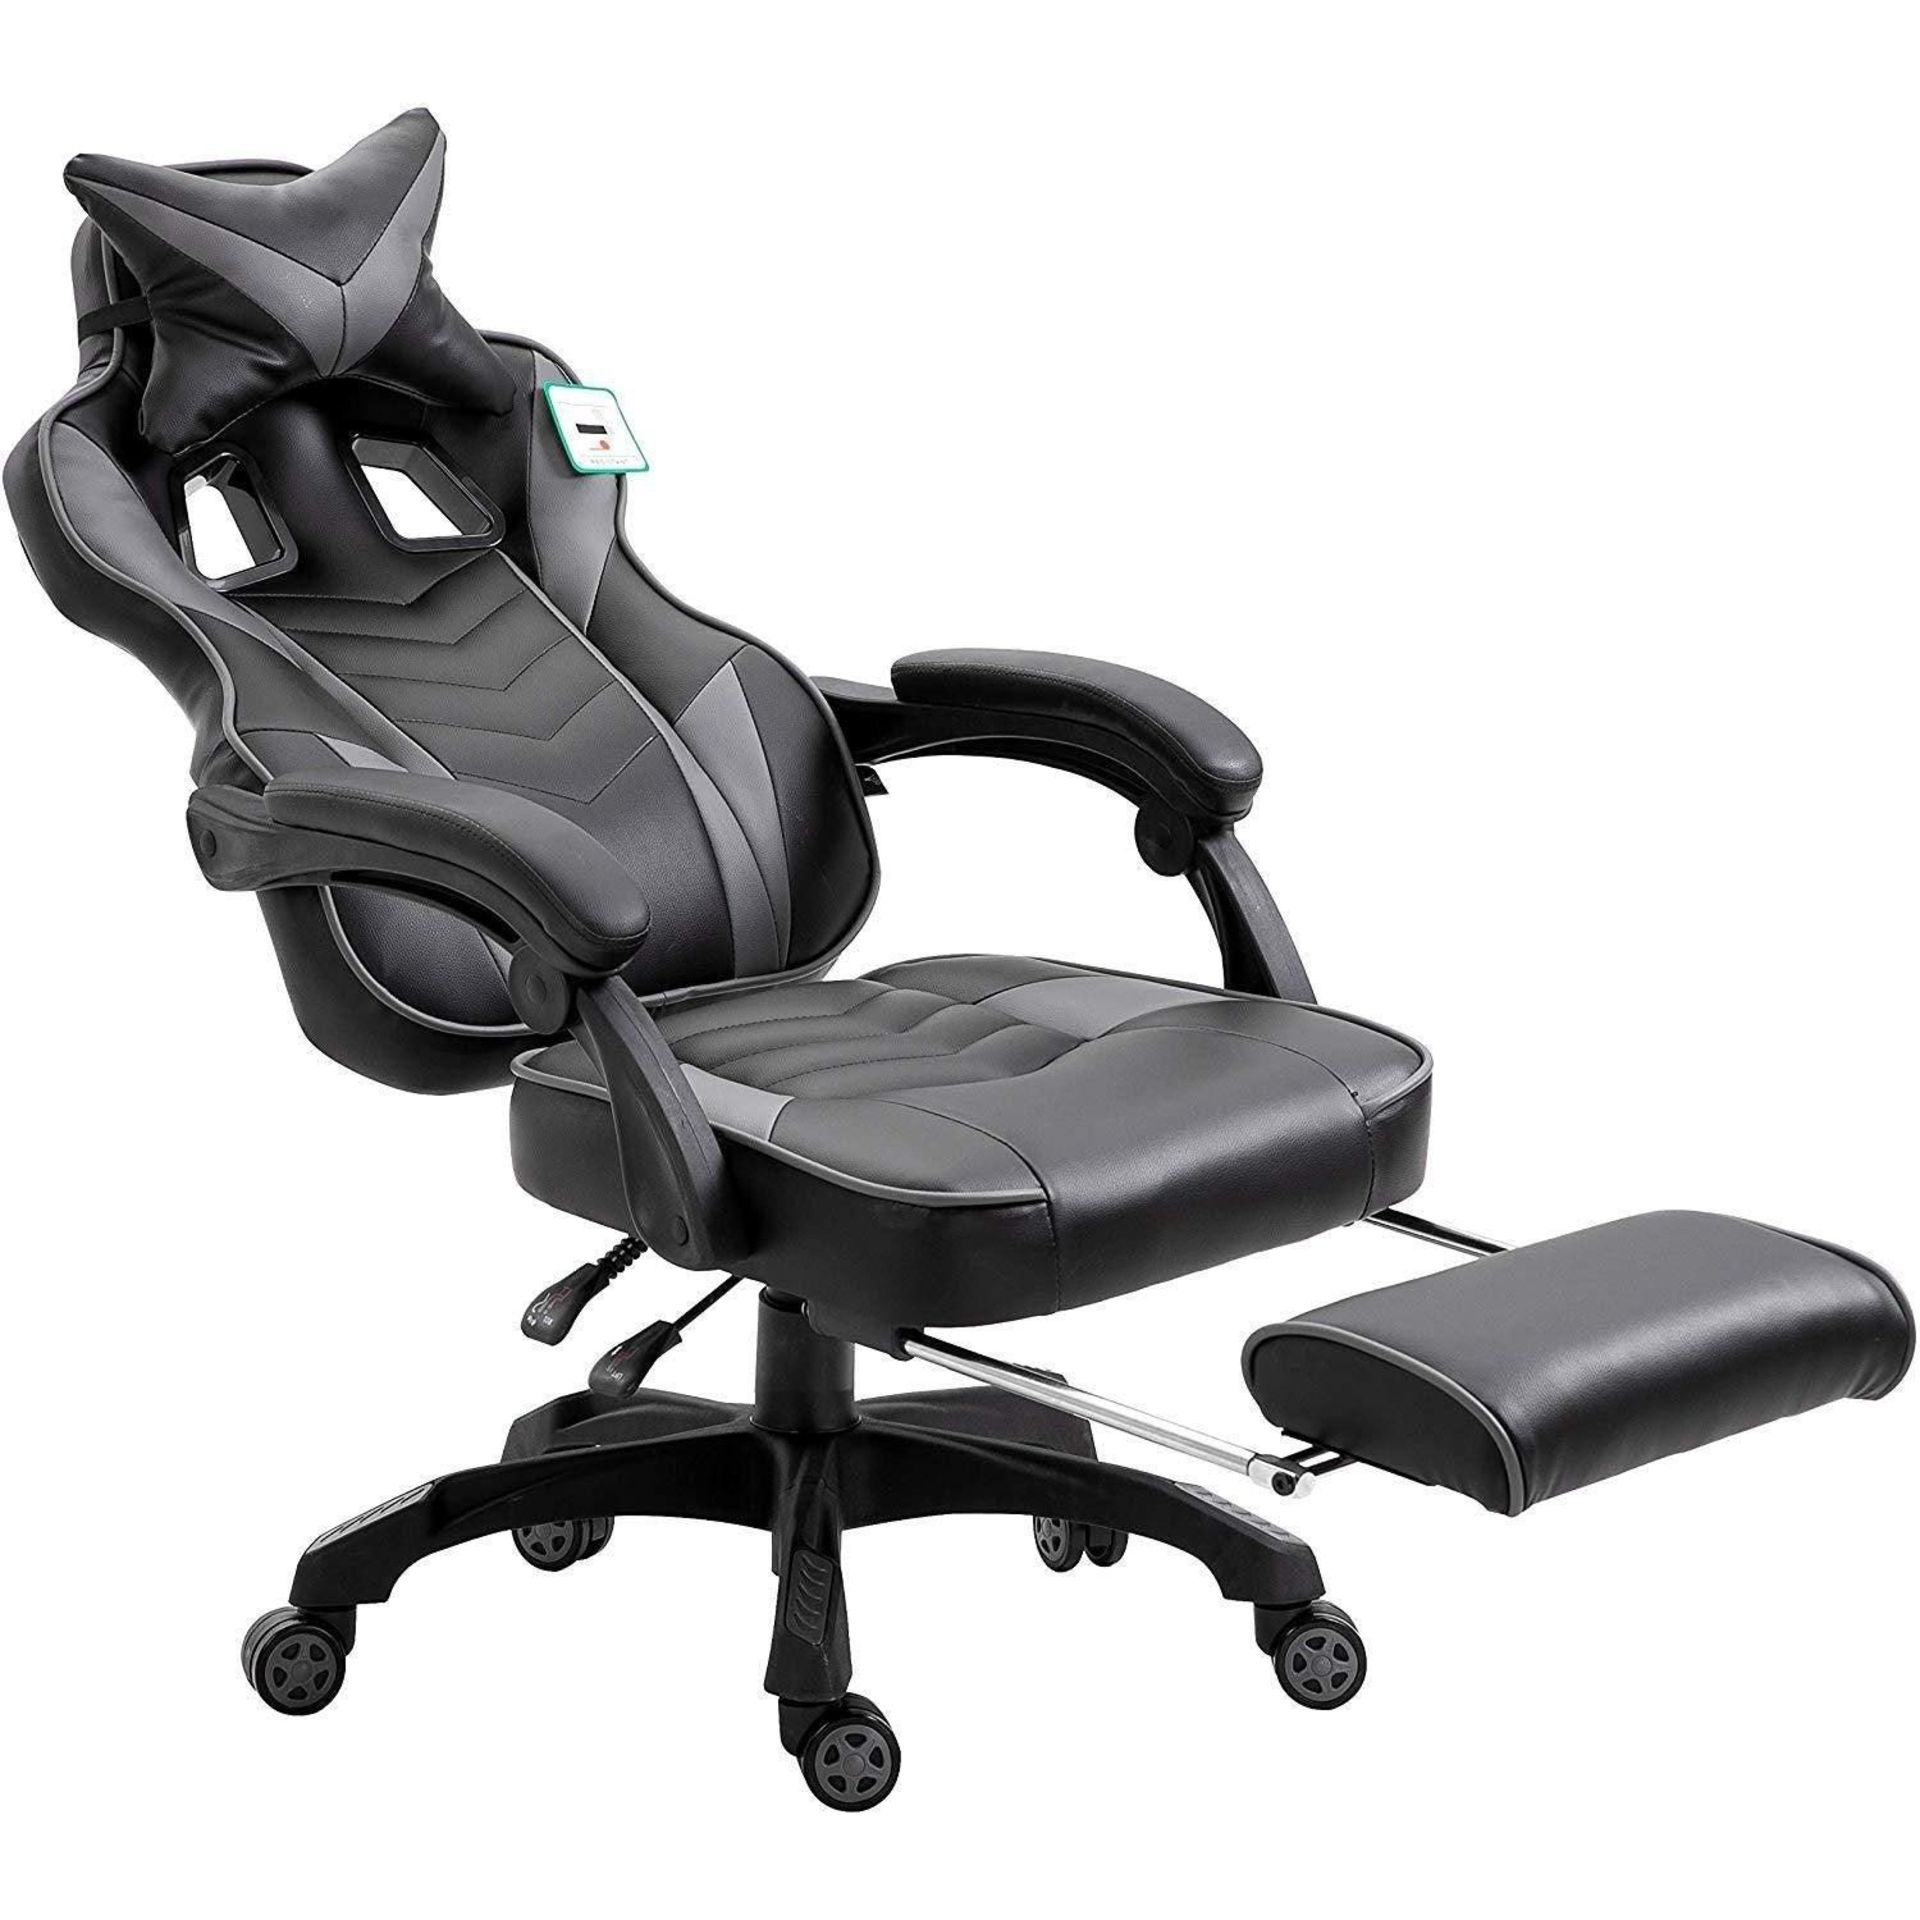 Cherry Tree Furniture High Back Recliner Gaming Chair with Cushion & Retractable Footrest Black & - Image 2 of 2